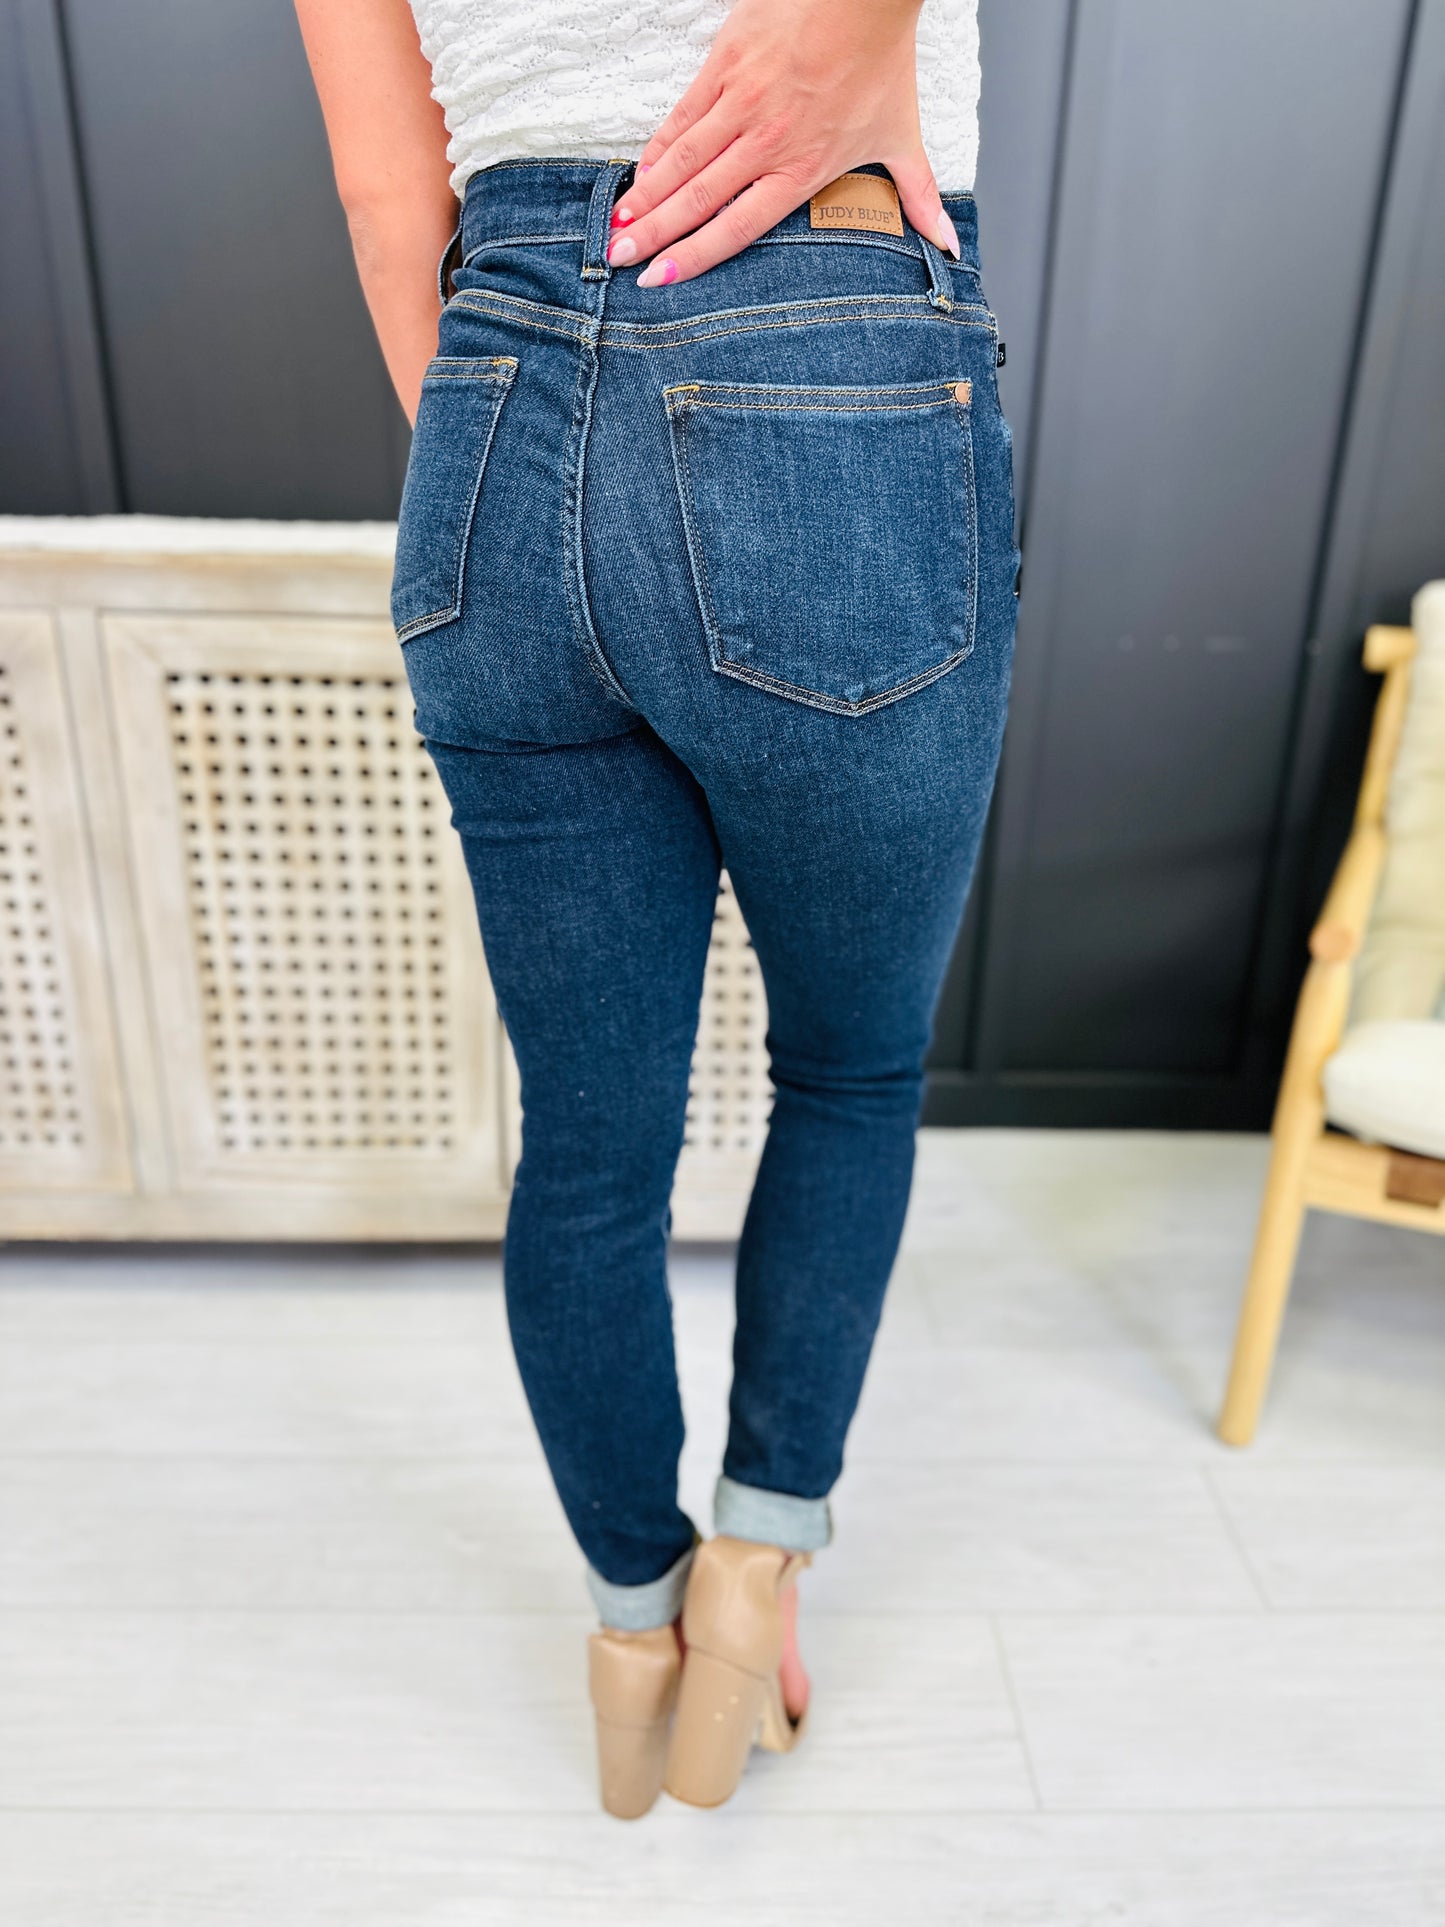 Restock! BEST SELLER! PLUS/REG Judy Blue The Holy Grail of Nondistressed Skinny Jeans